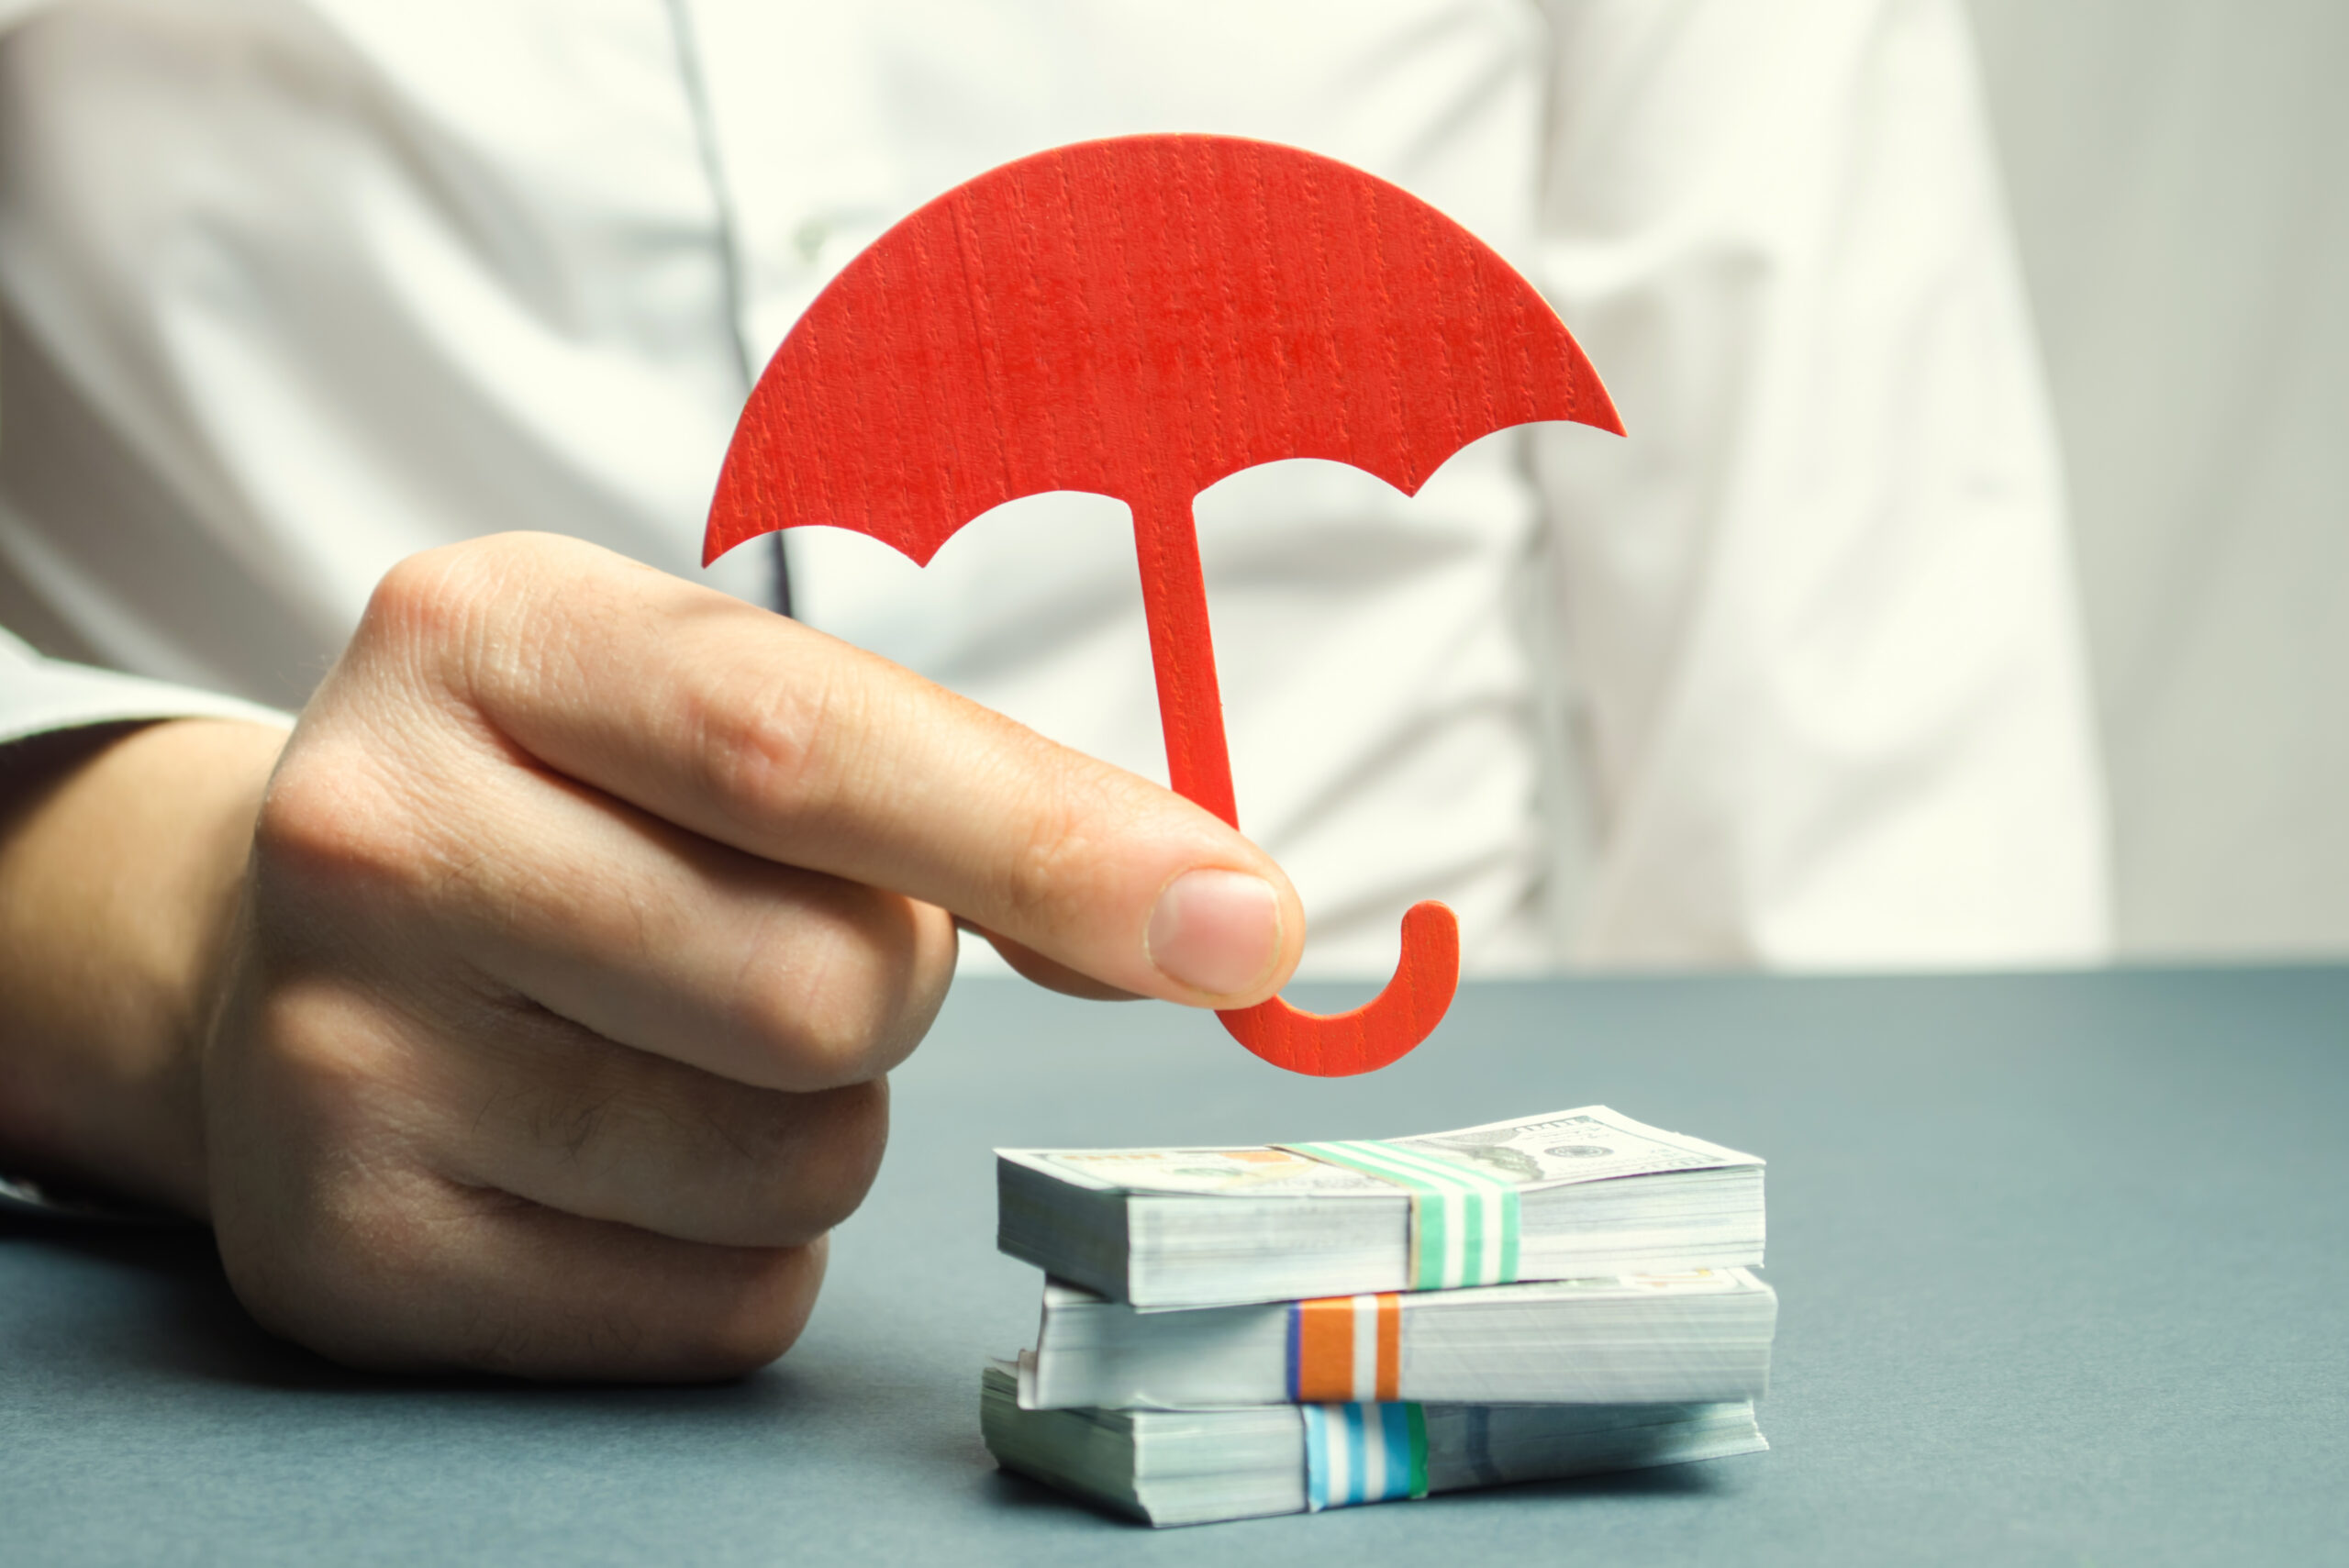 businessman-holding-small-cardboard-cutout-umbrella-over-miniature-bundles-of-money-to-symbolize-protecting-your-personal-assets